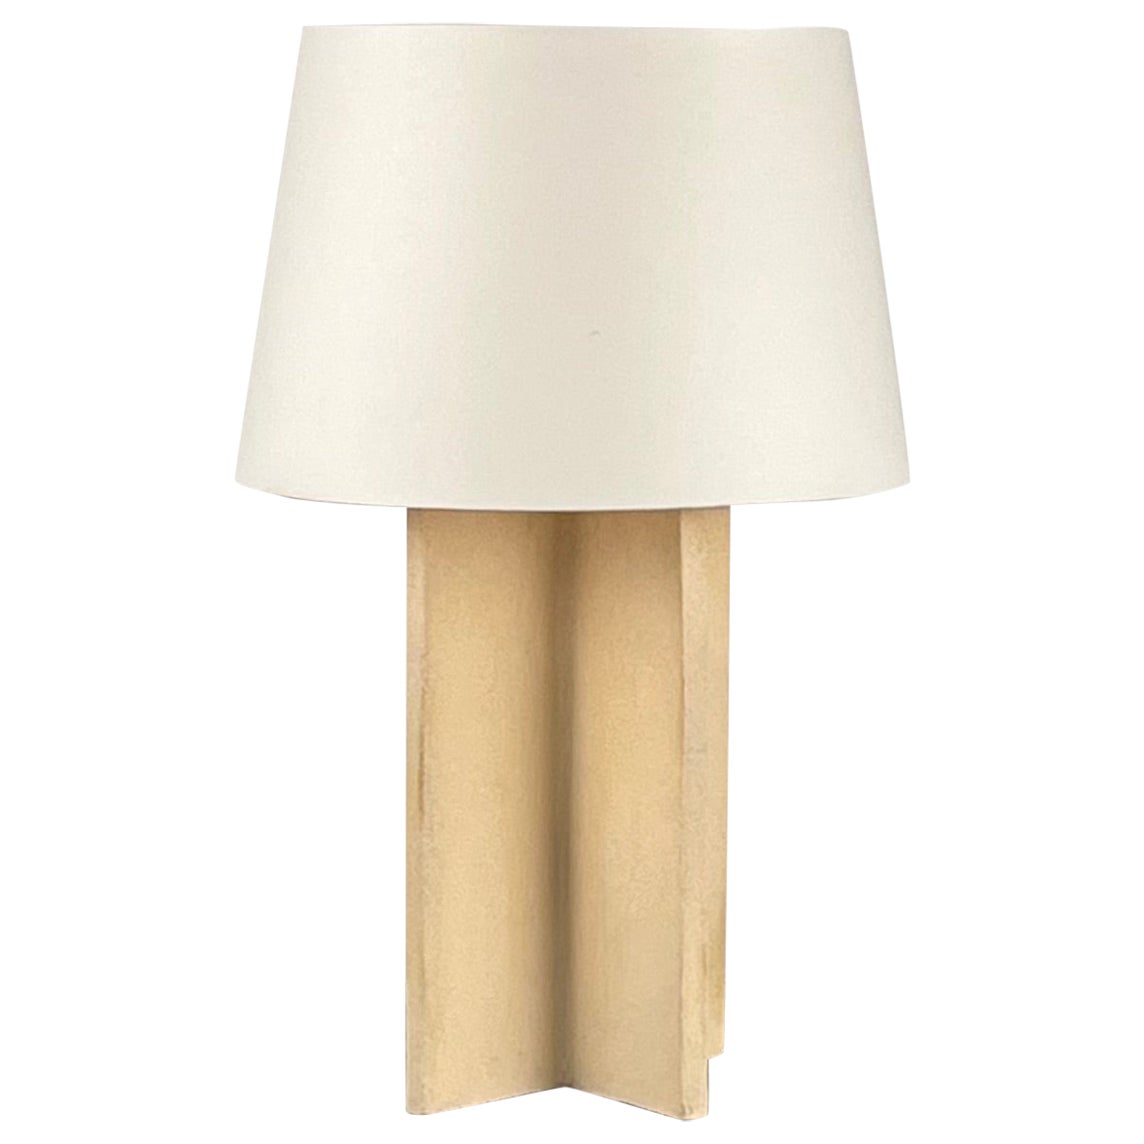 The 'Croisillon' Cream Ceramic Lamp with Parchment Shade by Design Frères For Sale